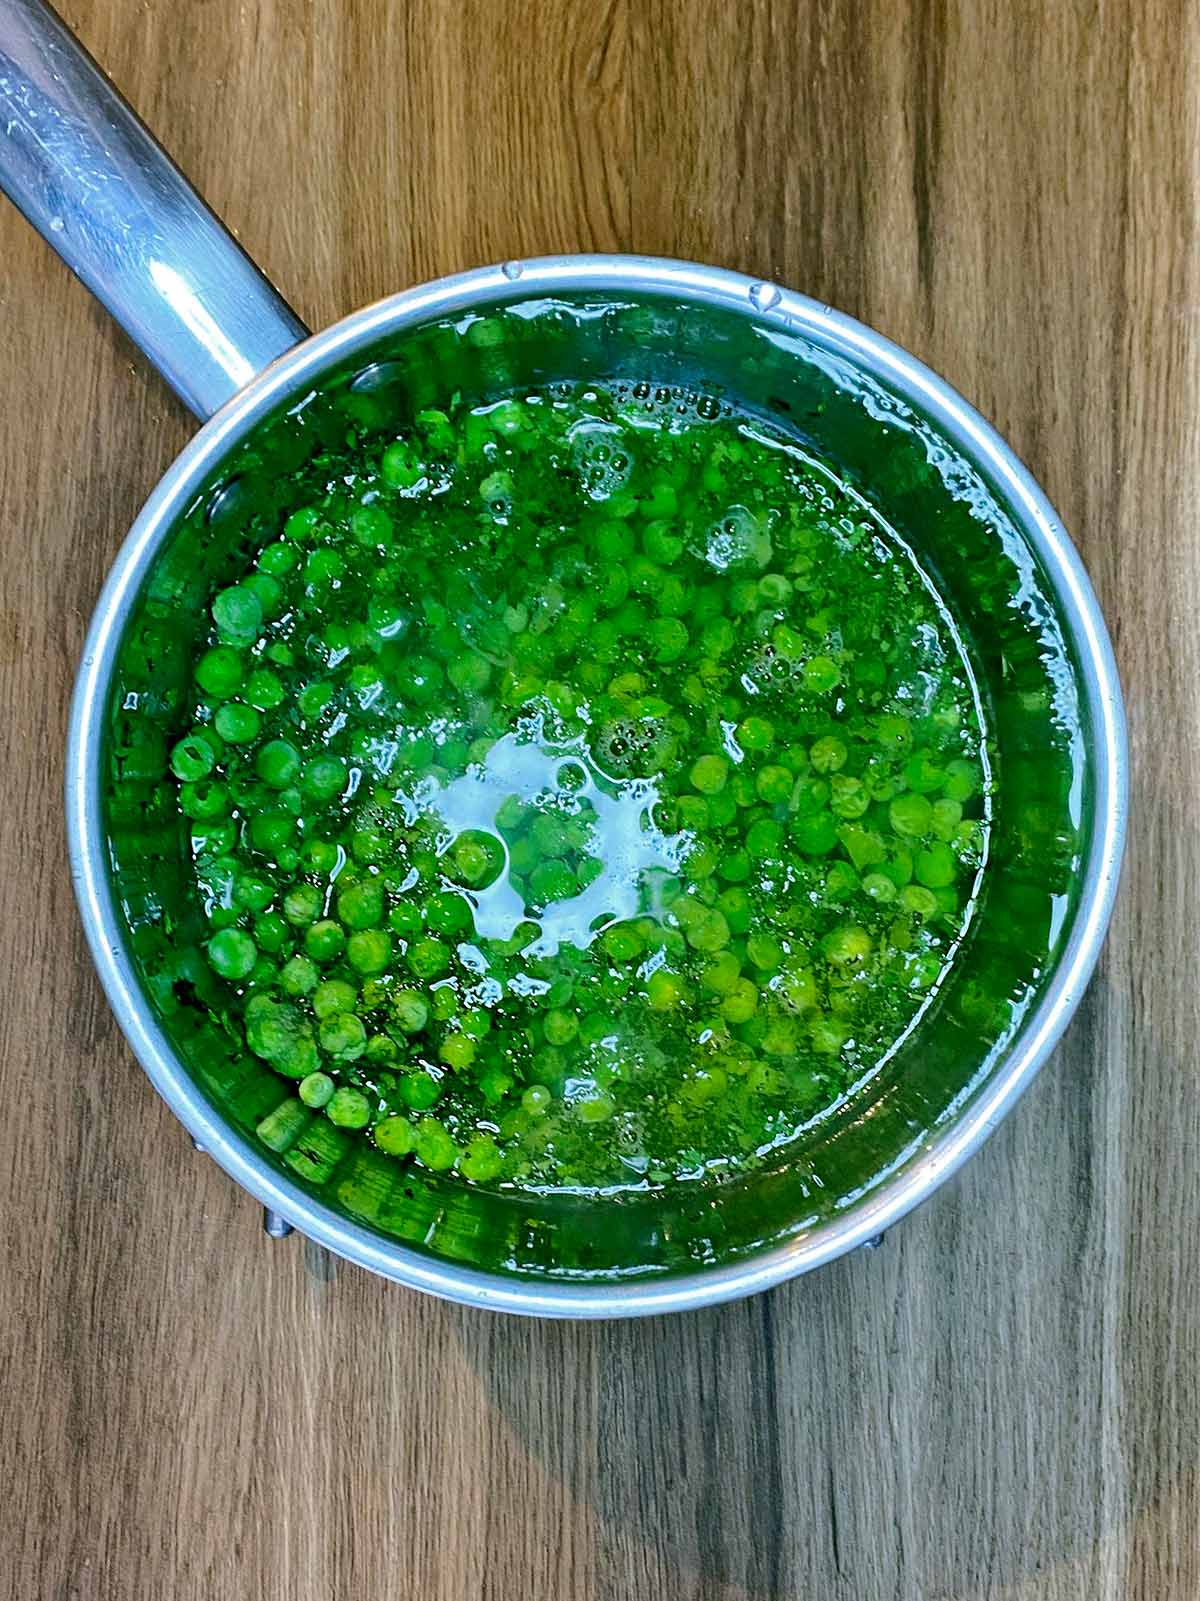 Water added to the pan to cover all the peas.